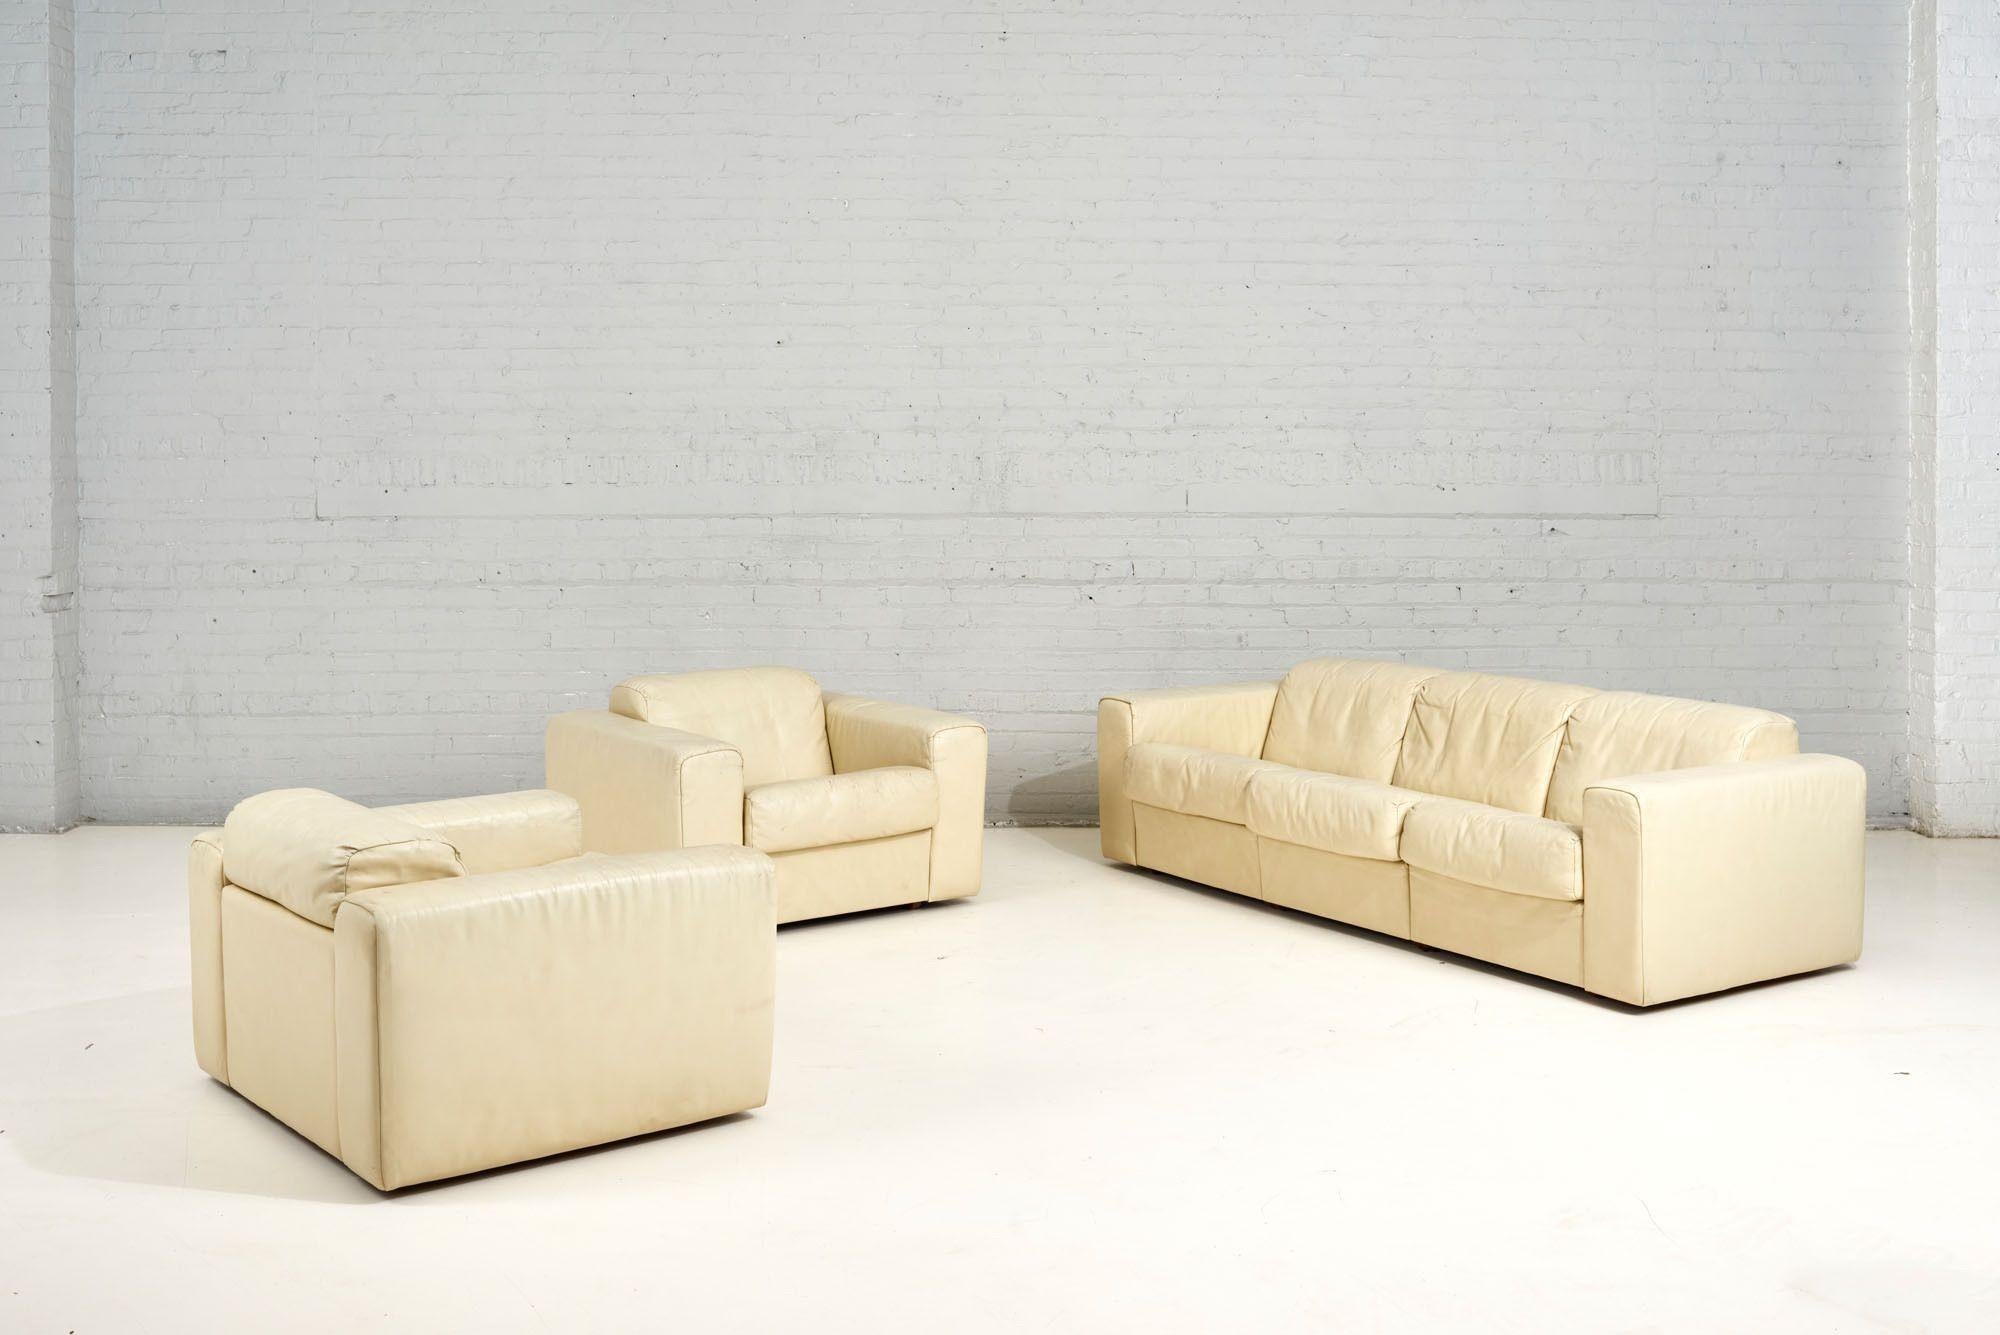 Baron Sofa by Robert Haussmann for Stendig, Cream Leather, 1970 For Sale 13